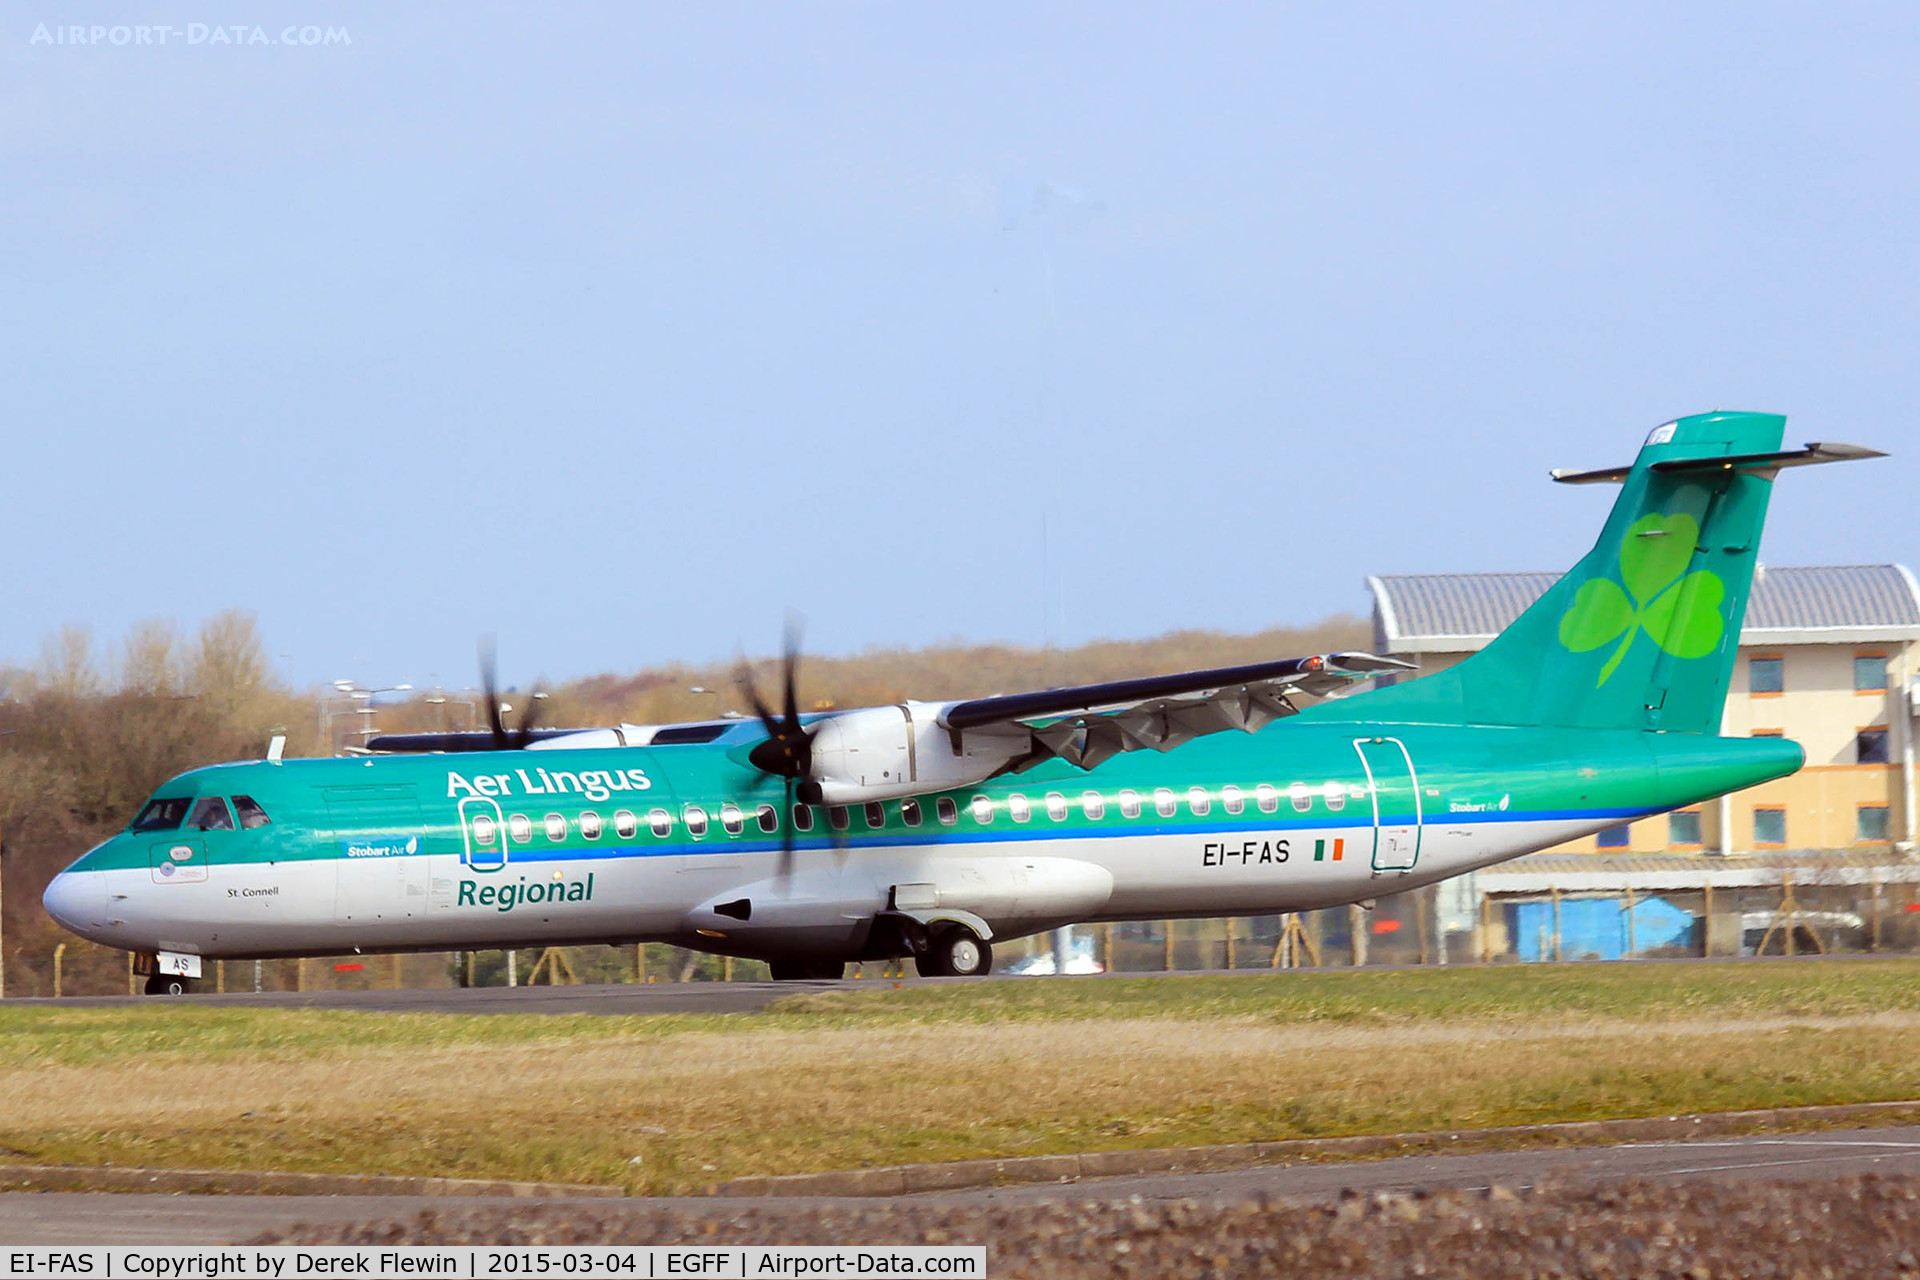 EI-FAS, 2013 ATR 72-600 (72-212A) C/N 1083, ATR 72-600, Aer Lingus Regional, operated by Stobart Air, Dublin based, previously F-WWET, call sign Stobart 90CW, seen landing on runway 30 at EGFF, out of Dublin.